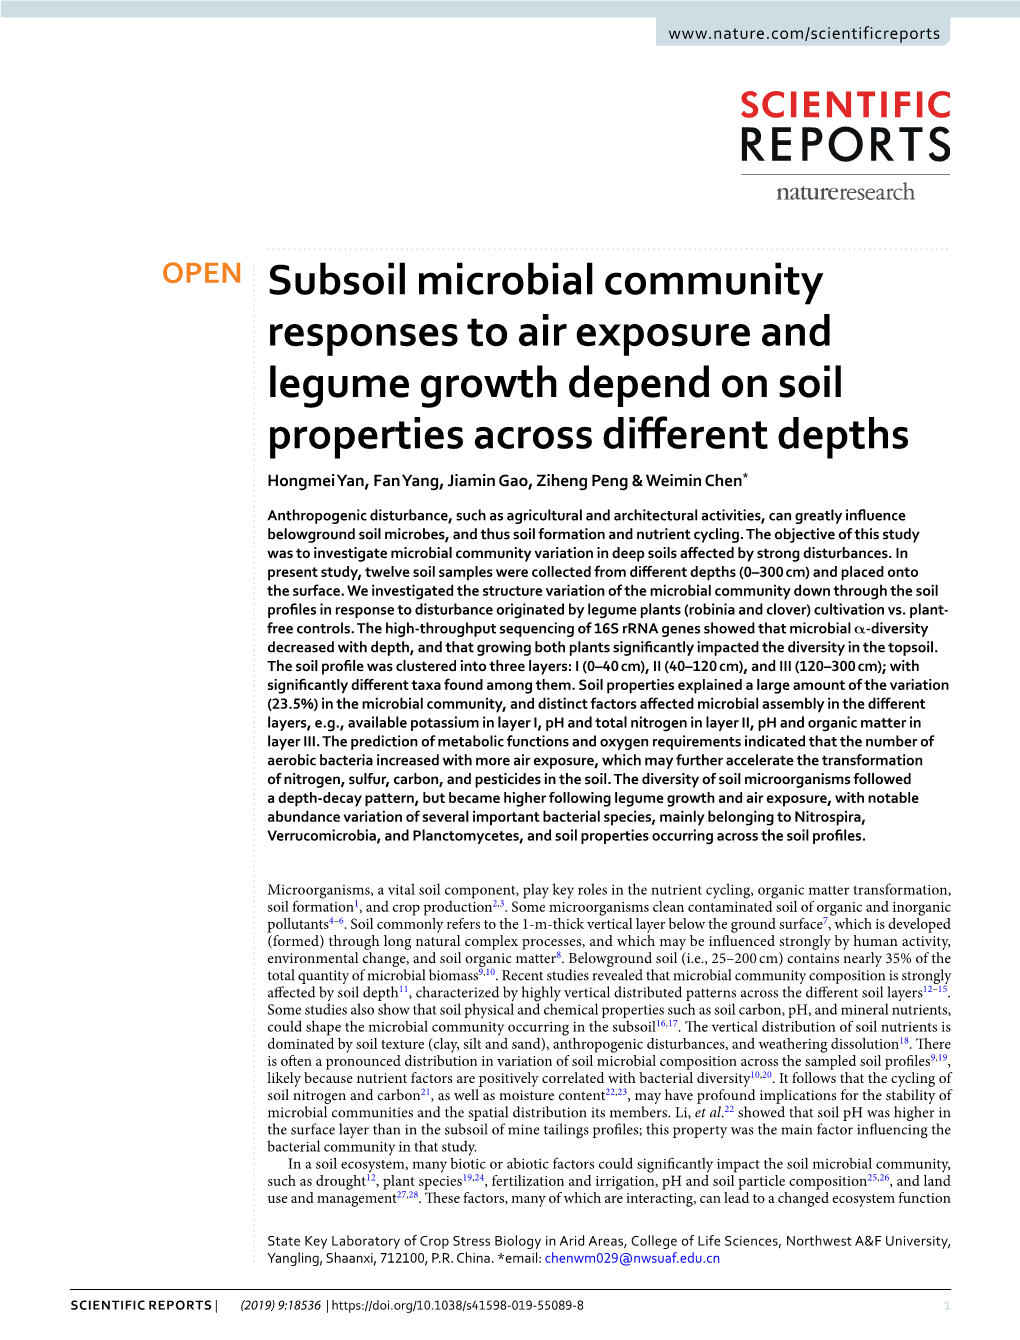 Subsoil Microbial Community Responses to Air Exposure And